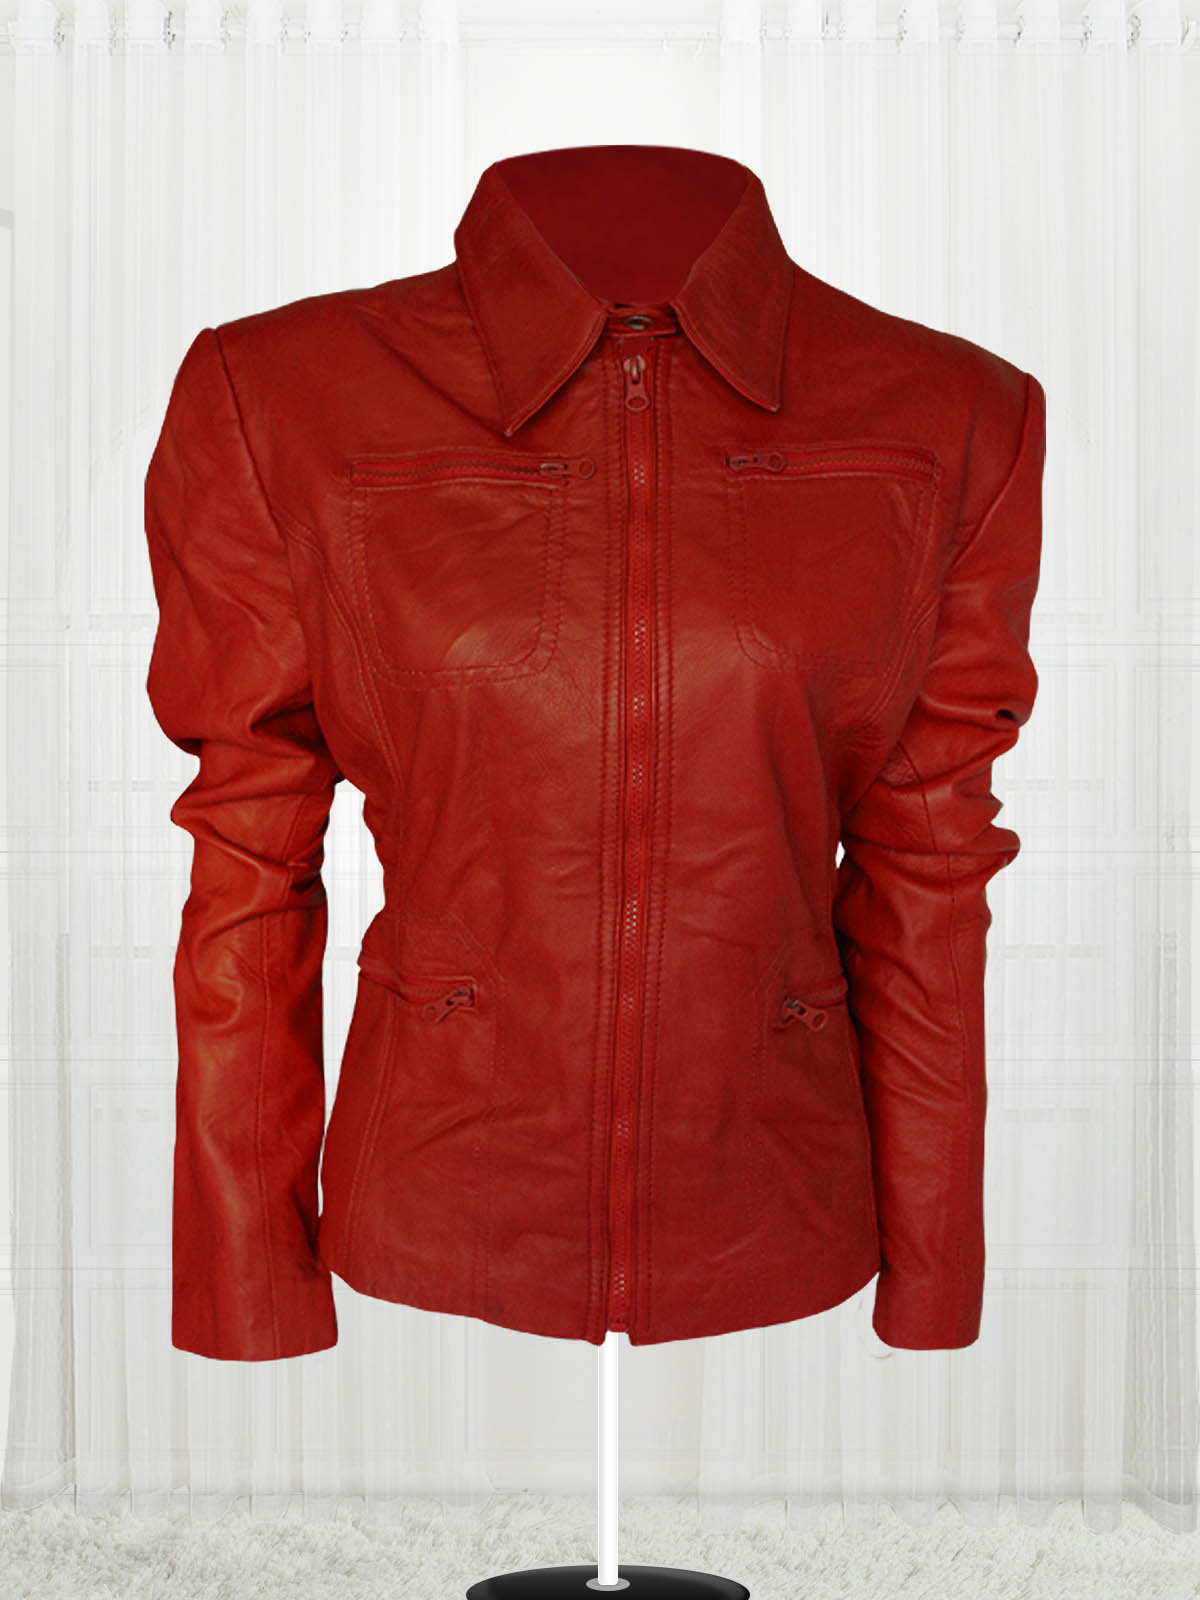 Once Upon A Time Jacket | Emma Swan Jacket